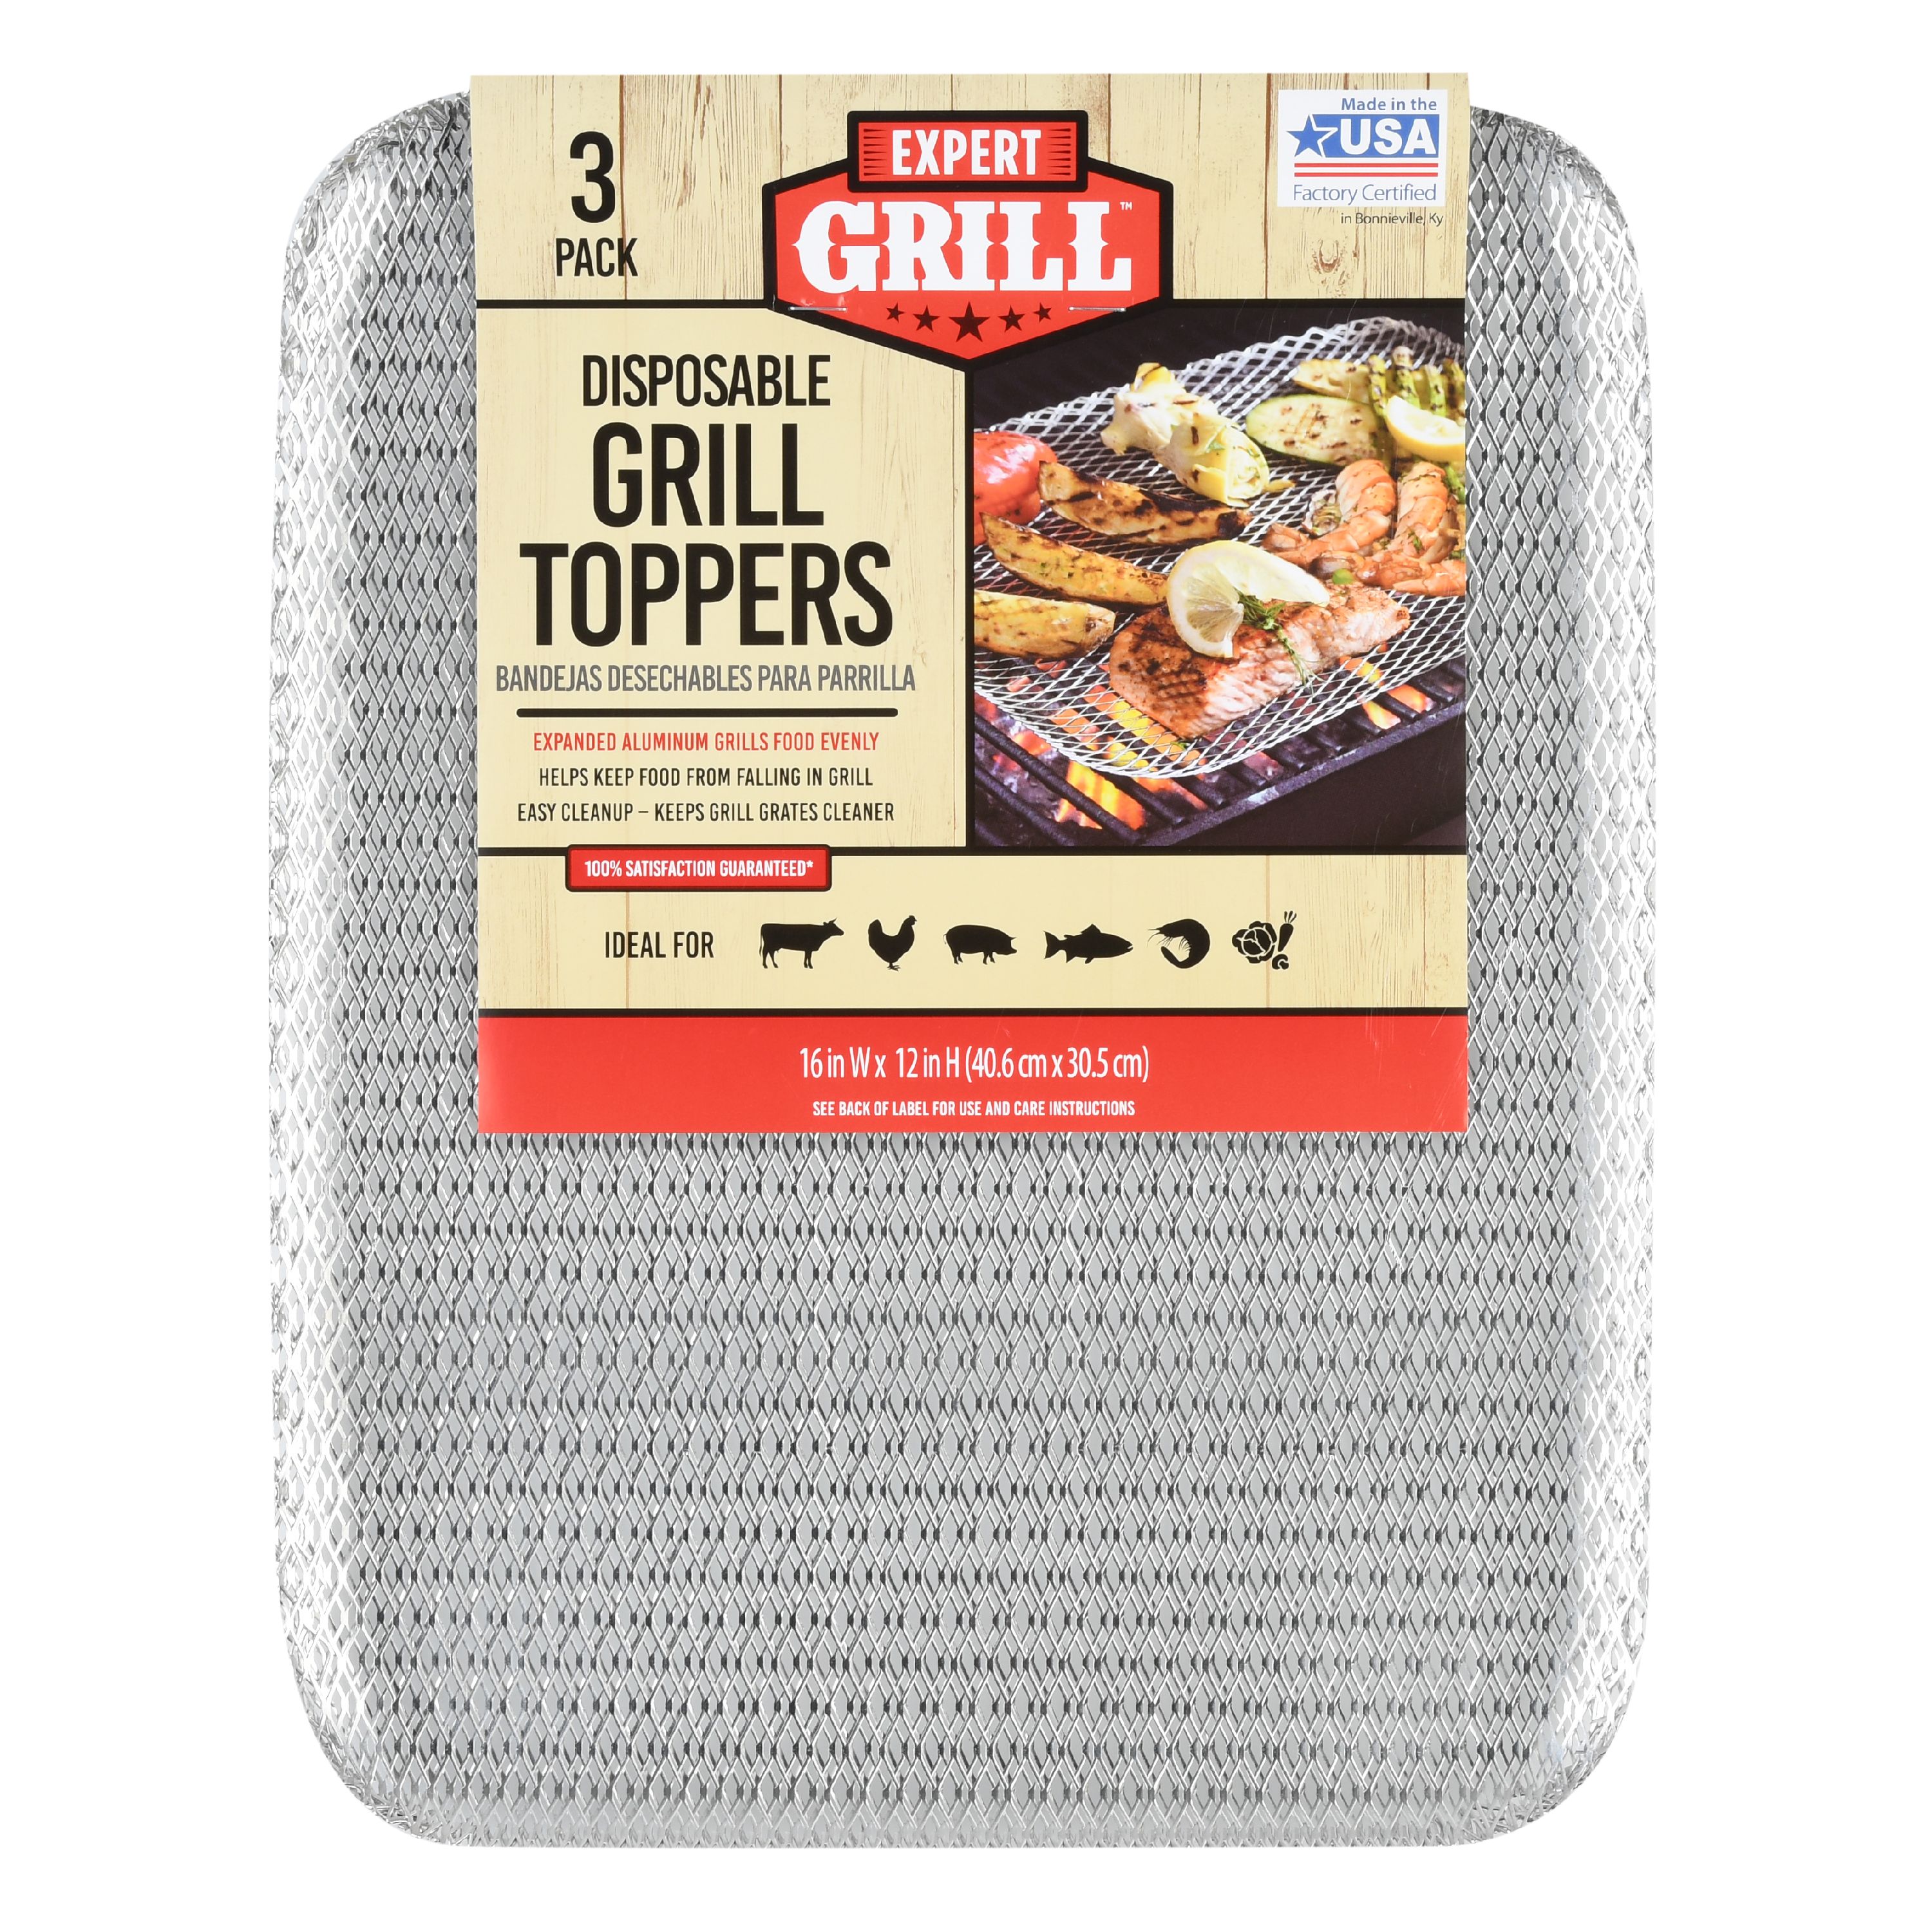 Expert Grill Disposable Grill Topper, 16" x 12", 3-Pack - image 1 of 9